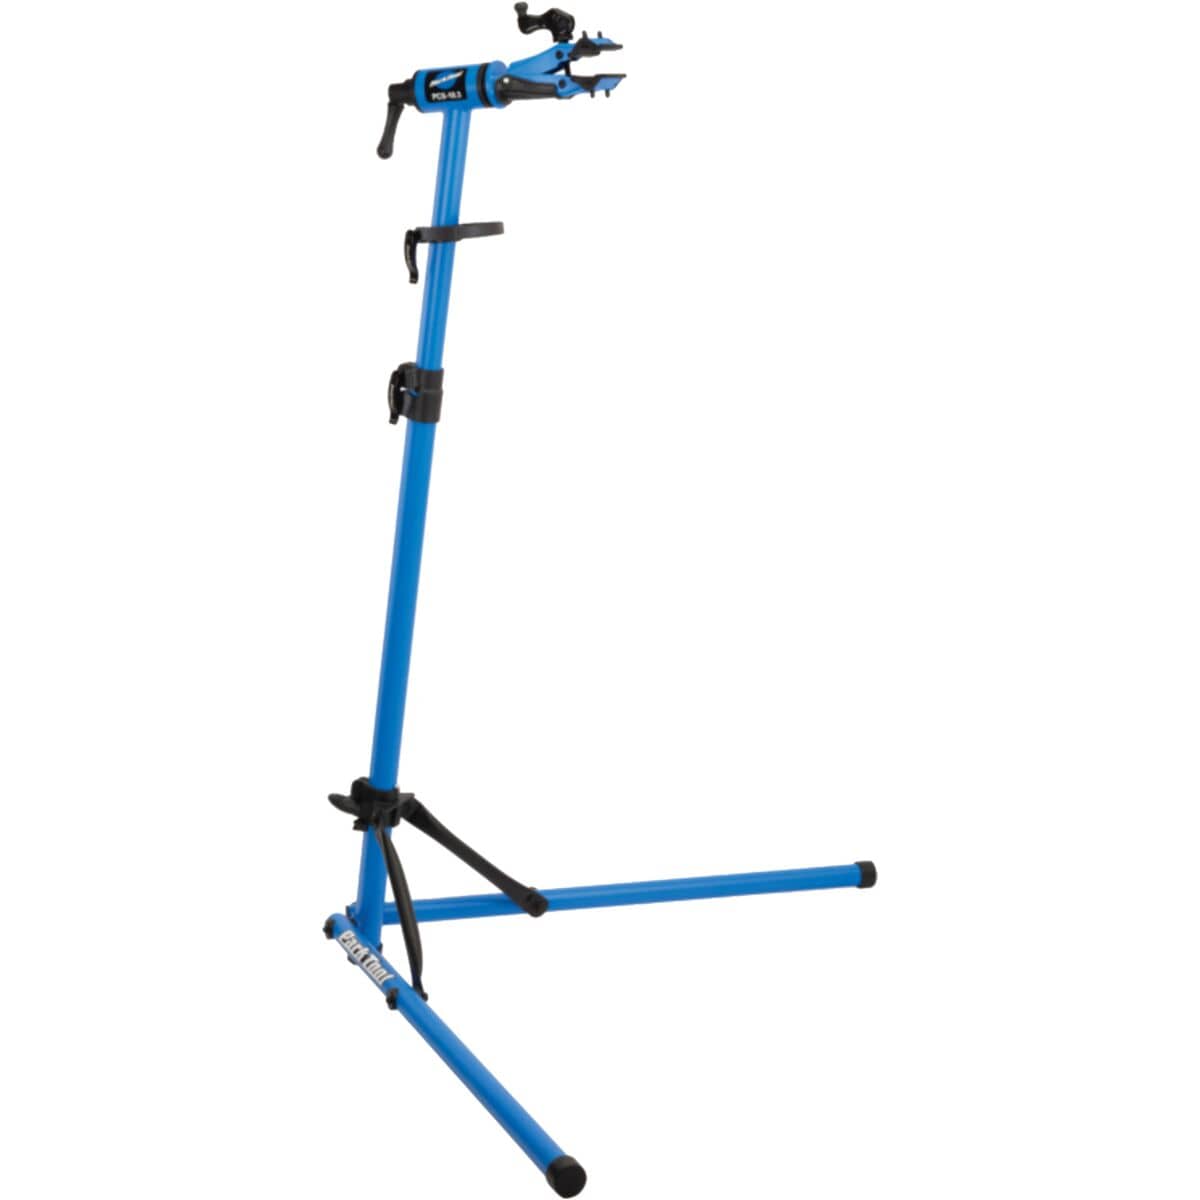 Park Tool PCS-10.3 Deluxe Home Mechanic Repair Stand Blue, One Size